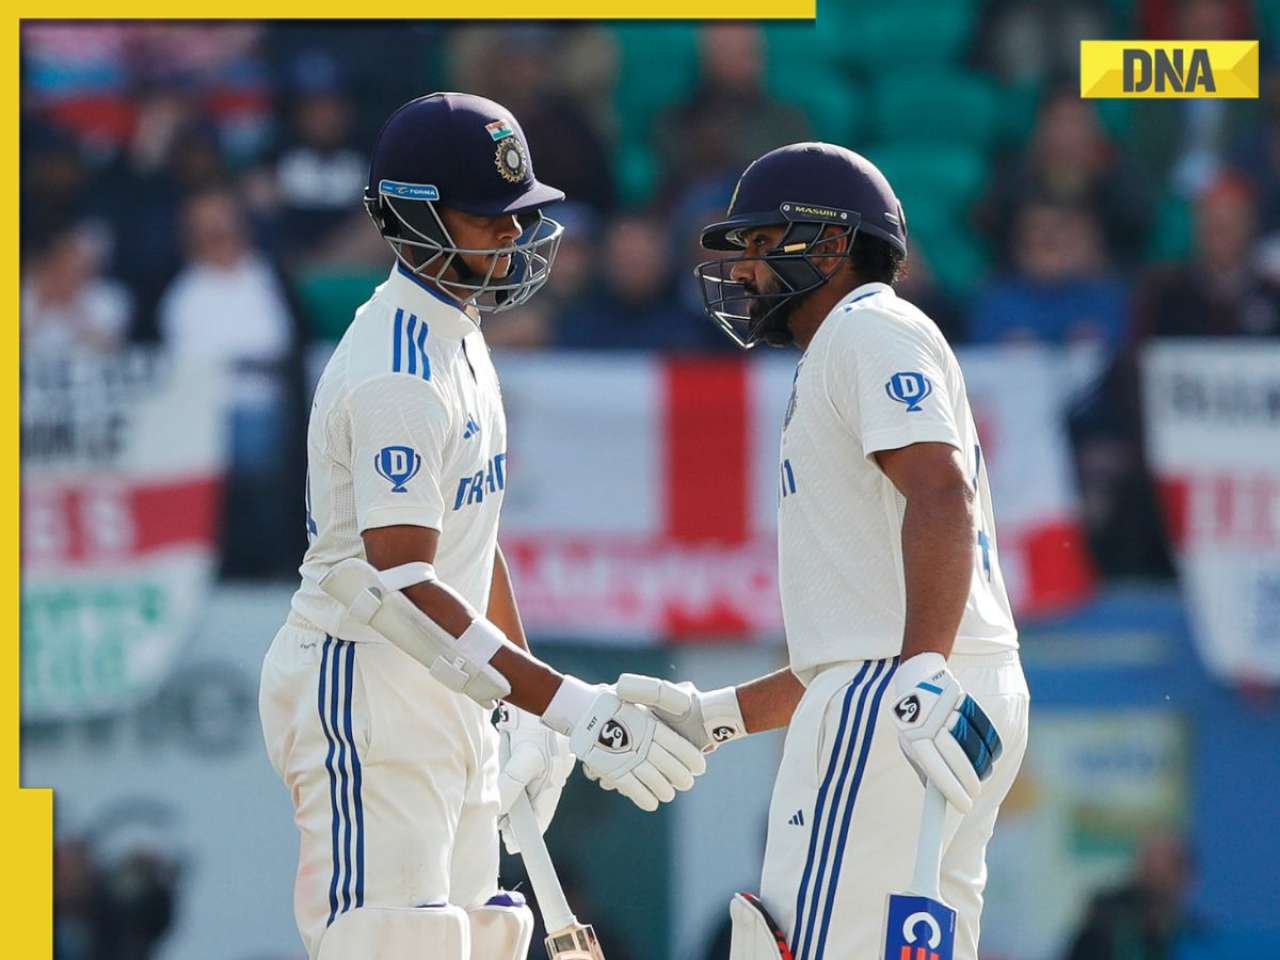 India vs England 5th Test: IND 135/1 at stumps on day 1, Rohit, Yashasvi score fifties; ENG 218 all out